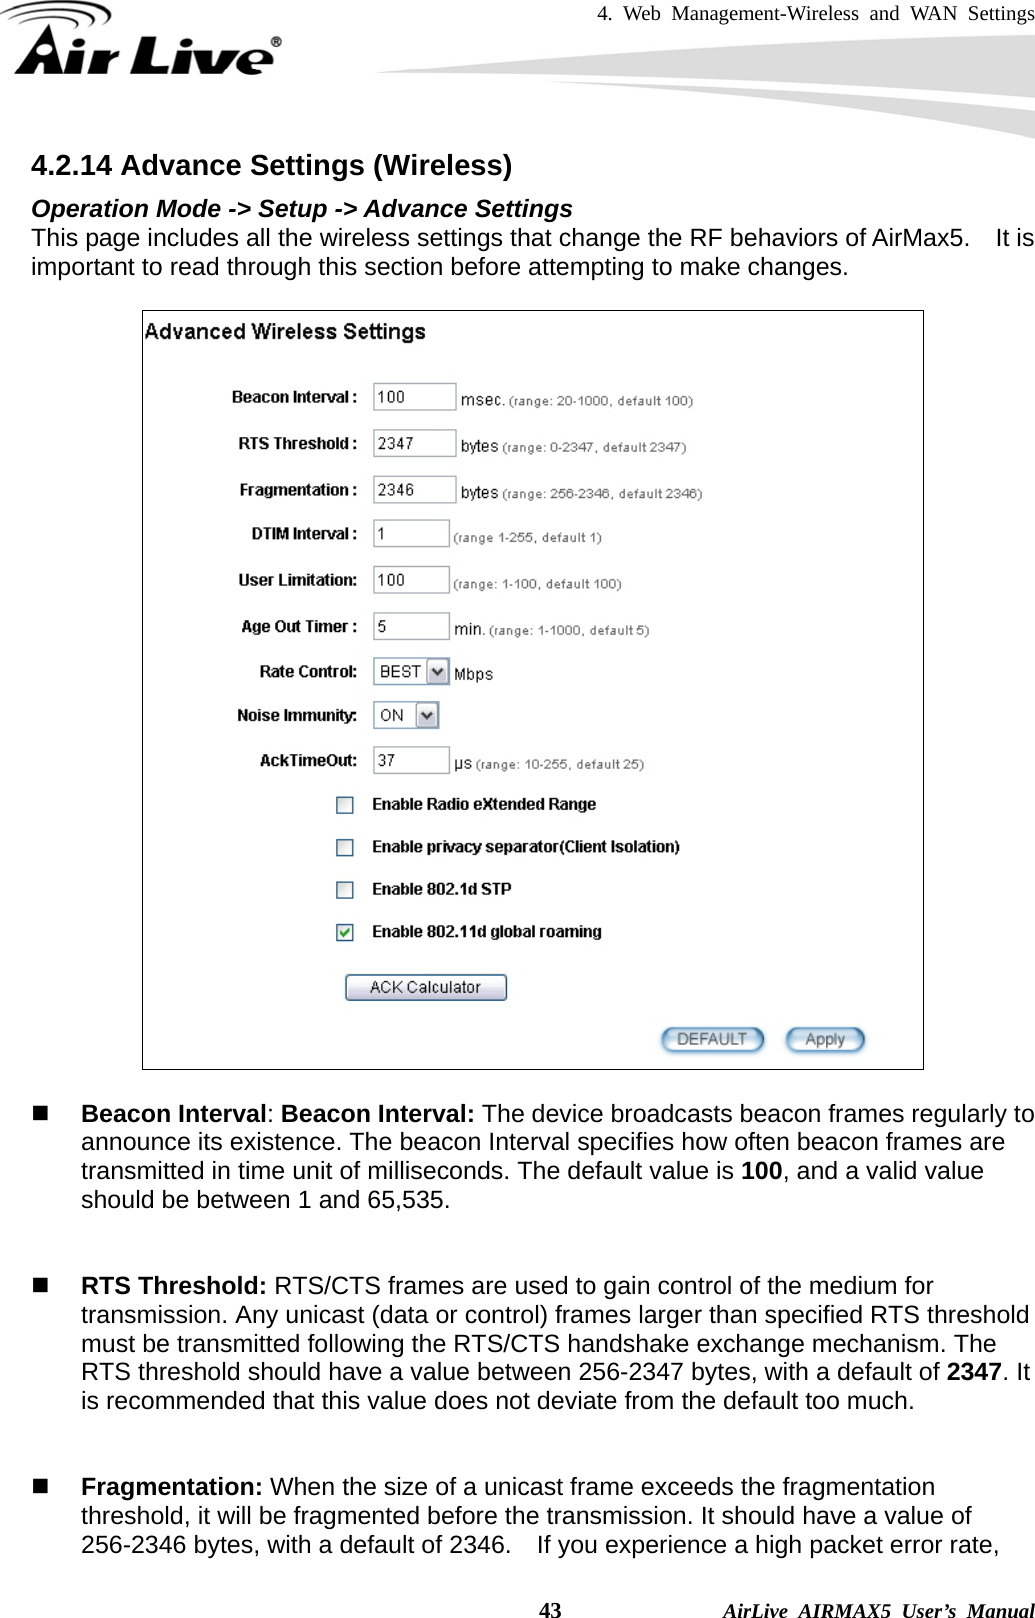 4. Web Management-Wireless and WAN Settings    43              AirLive AIRMAX5 User’s Manual 4.2.14 Advance Settings (Wireless) Operation Mode -&gt; Setup -&gt; Advance Settings This page includes all the wireless settings that change the RF behaviors of AirMax5.    It is important to read through this section before attempting to make changes.       Beacon Interval: Beacon Interval: The device broadcasts beacon frames regularly to announce its existence. The beacon Interval specifies how often beacon frames are transmitted in time unit of milliseconds. The default value is 100, and a valid value should be between 1 and 65,535.      RTS Threshold: RTS/CTS frames are used to gain control of the medium for transmission. Any unicast (data or control) frames larger than specified RTS threshold must be transmitted following the RTS/CTS handshake exchange mechanism. The RTS threshold should have a value between 256-2347 bytes, with a default of 2347. It is recommended that this value does not deviate from the default too much.      Fragmentation: When the size of a unicast frame exceeds the fragmentation threshold, it will be fragmented before the transmission. It should have a value of 256-2346 bytes, with a default of 2346.  If you experience a high packet error rate, 